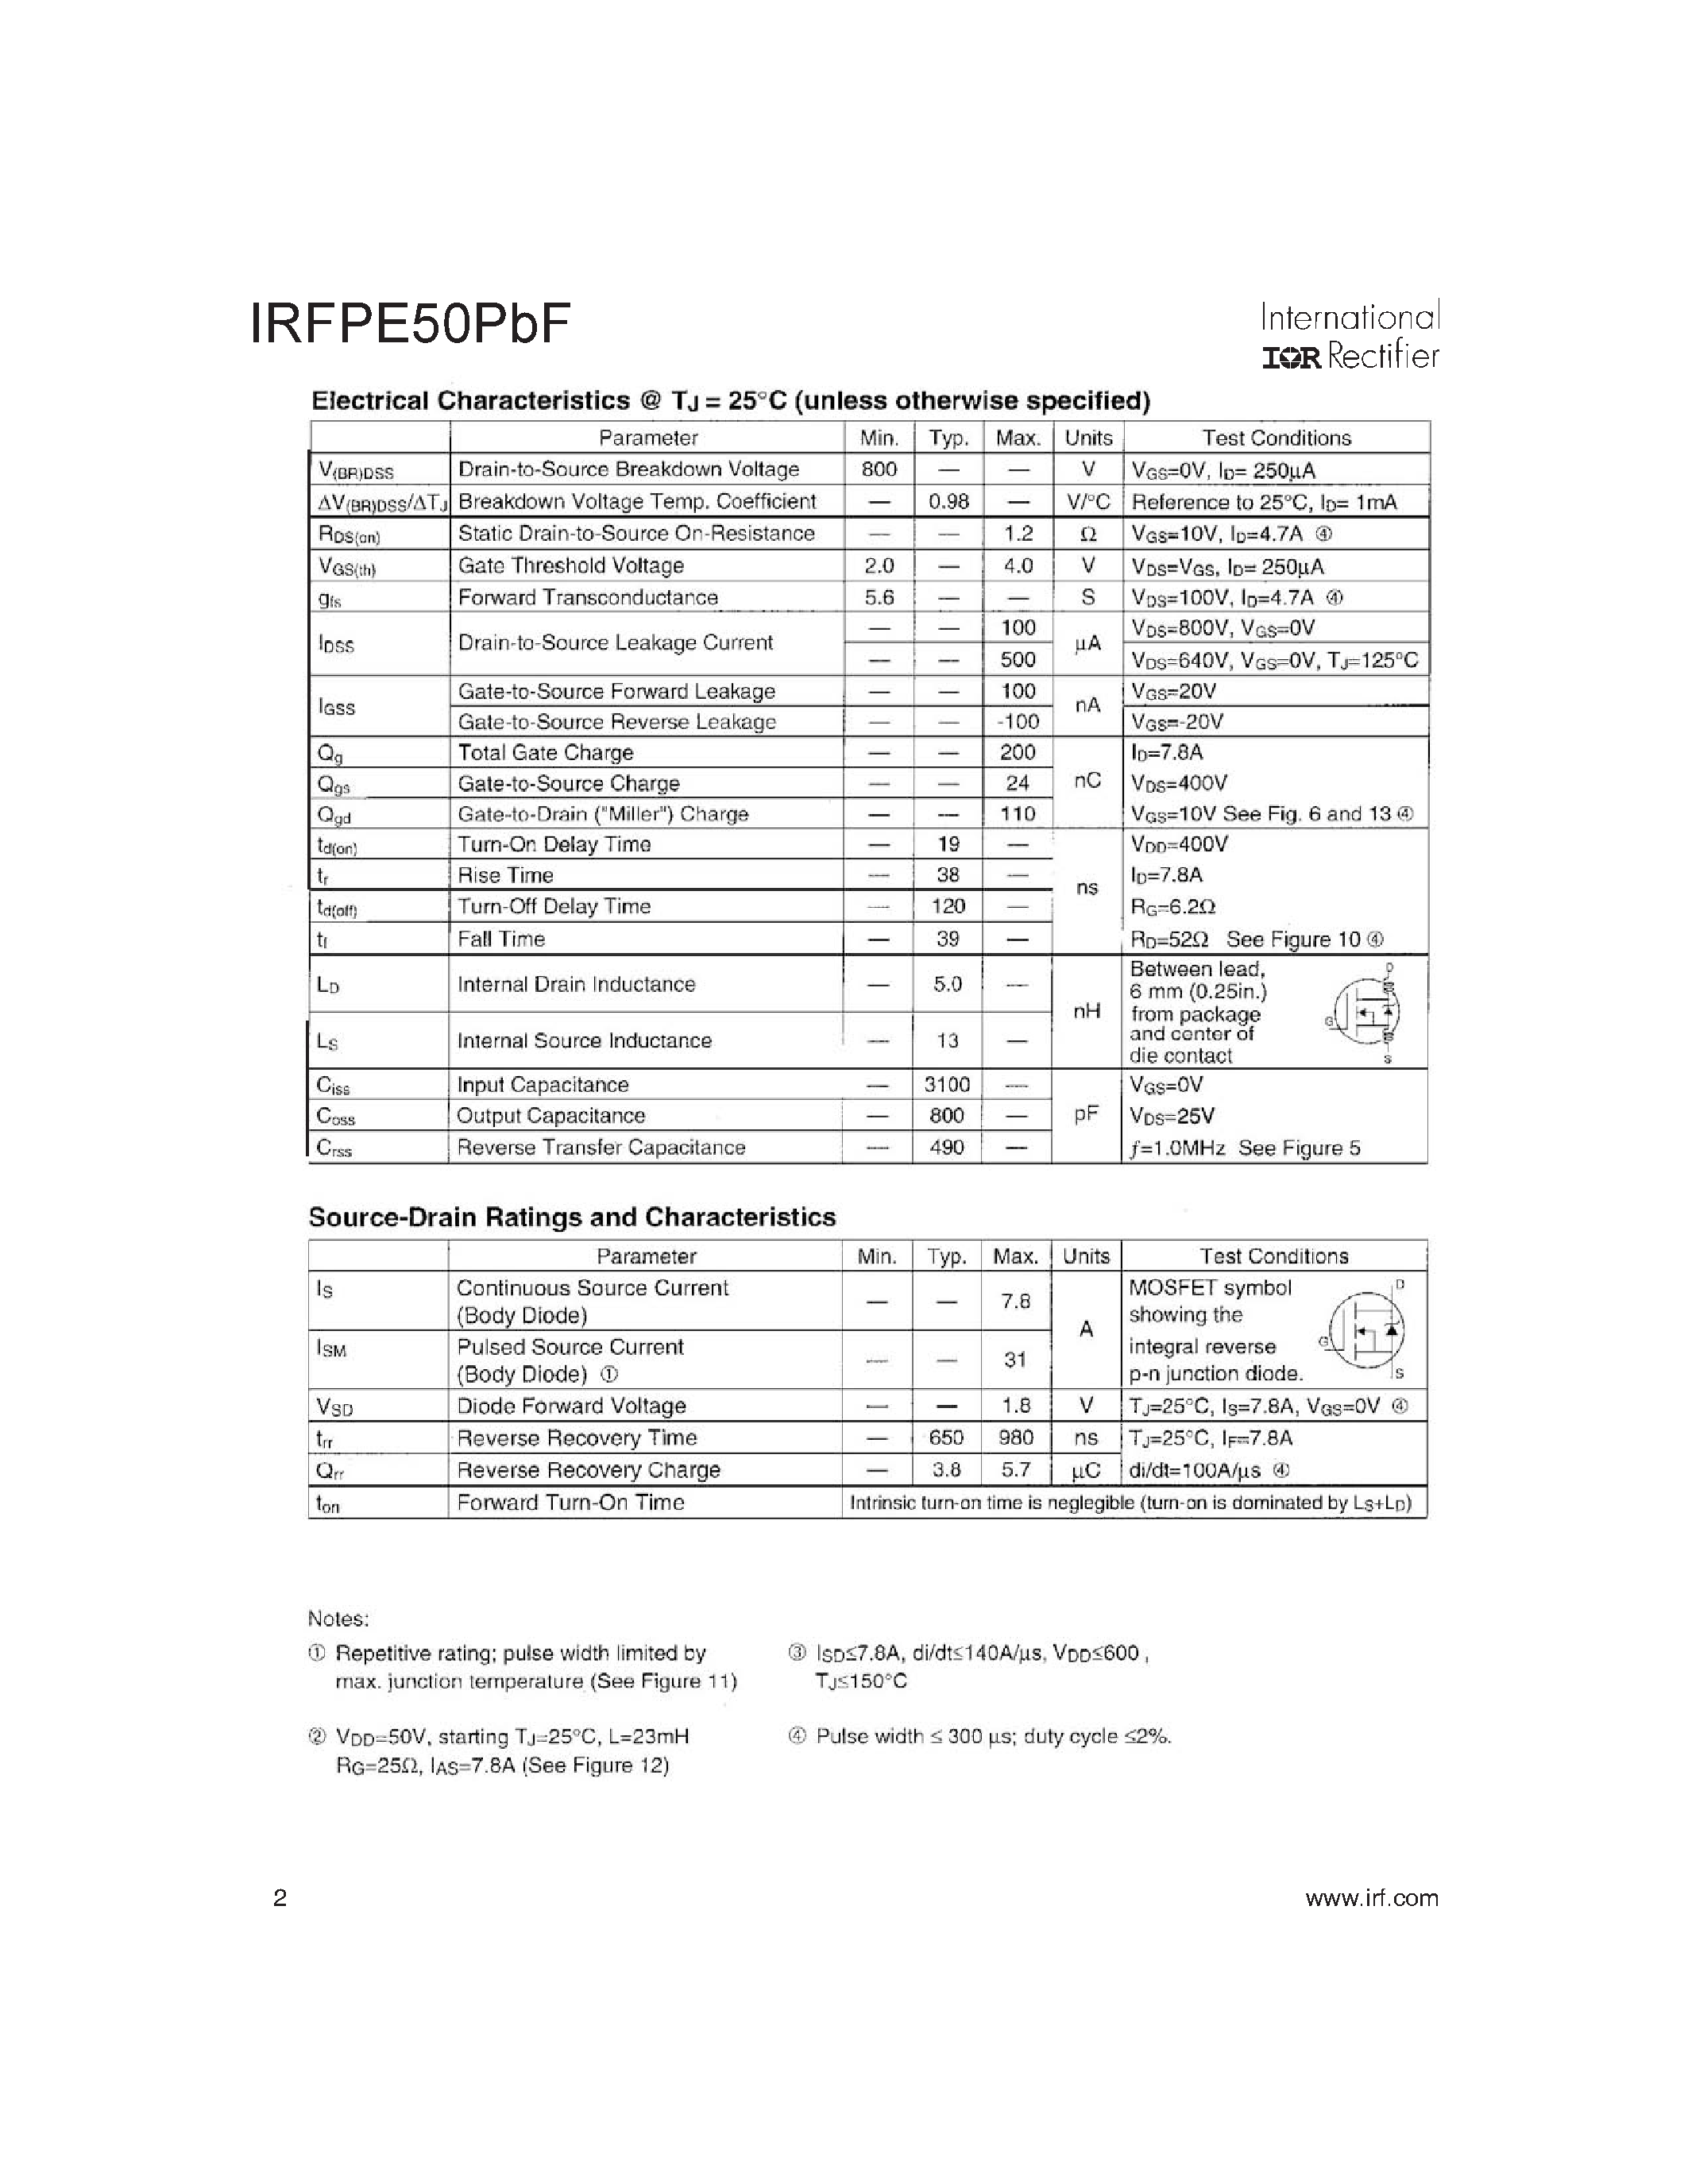 Datasheet IRFPE50PBF - Power MOSFET page 2